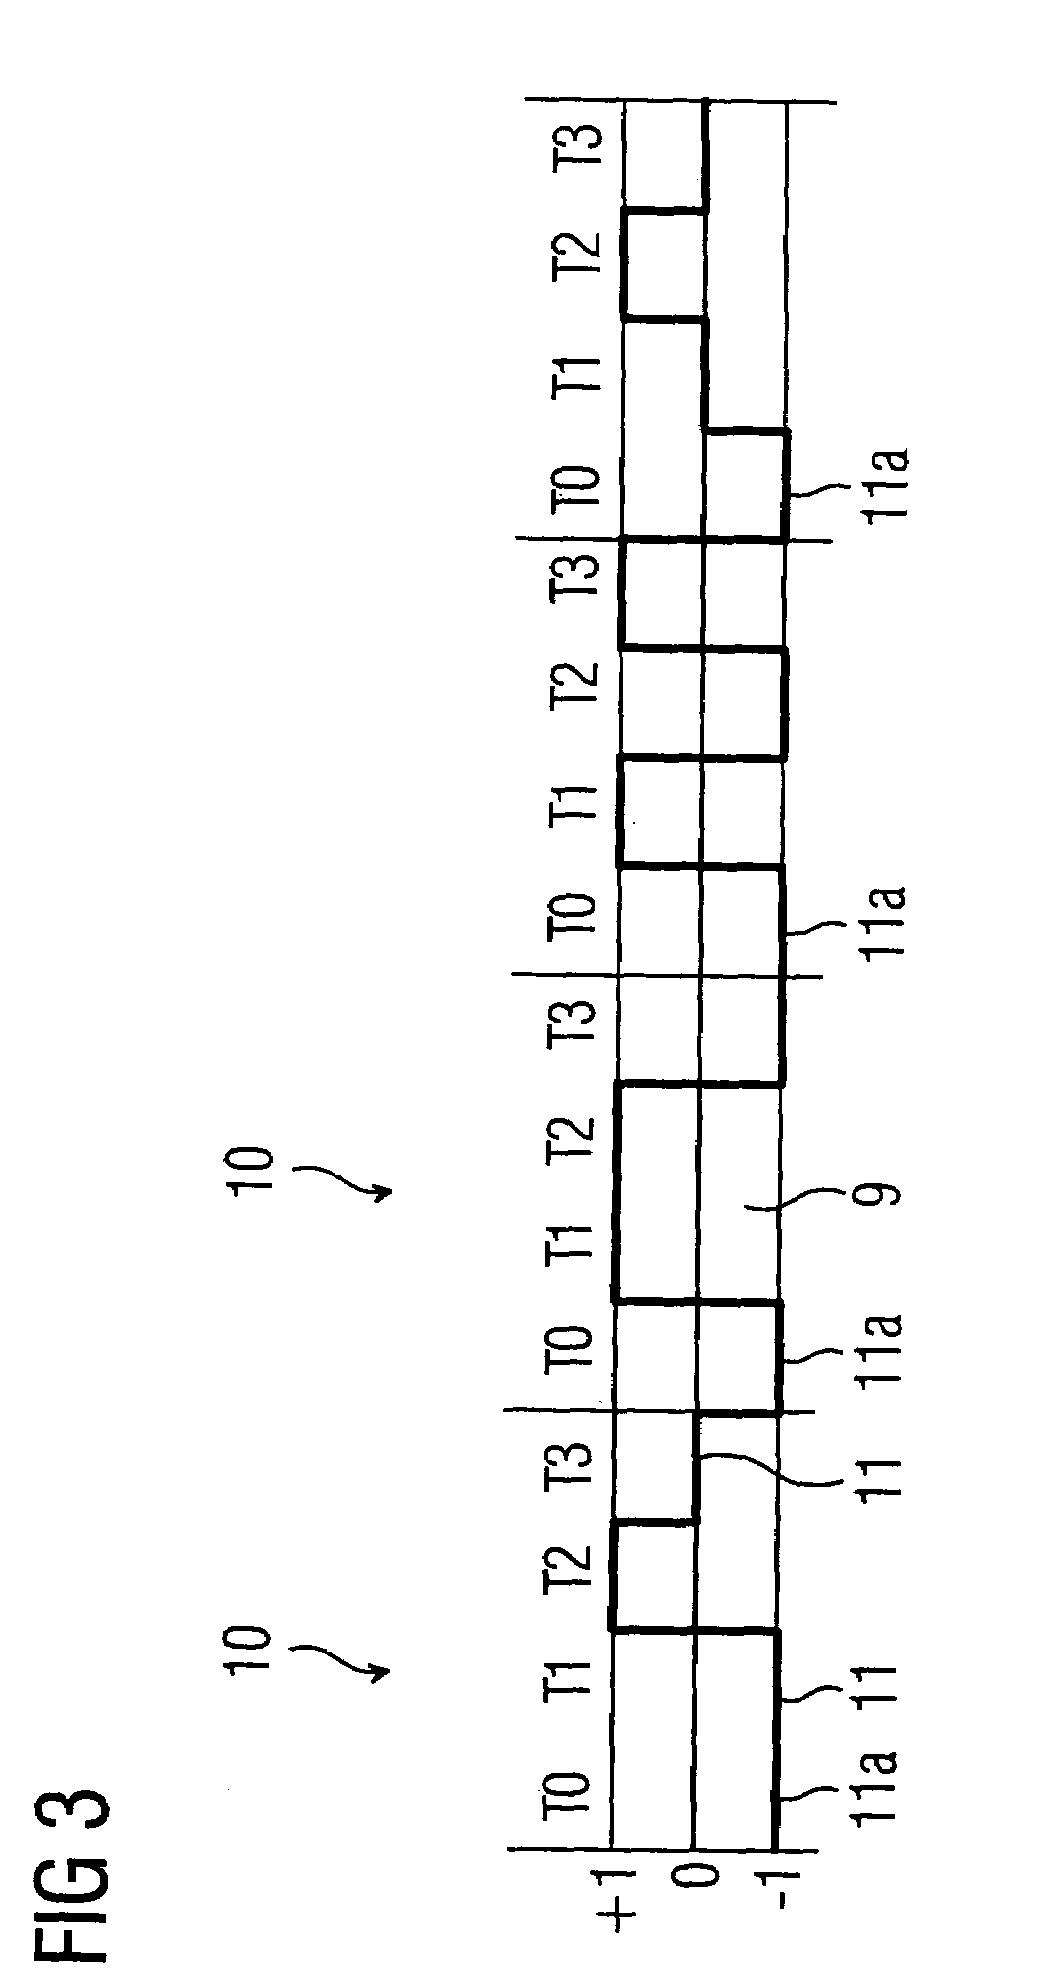 Railway system with at least one track, and method for encoding data for transmission over the track